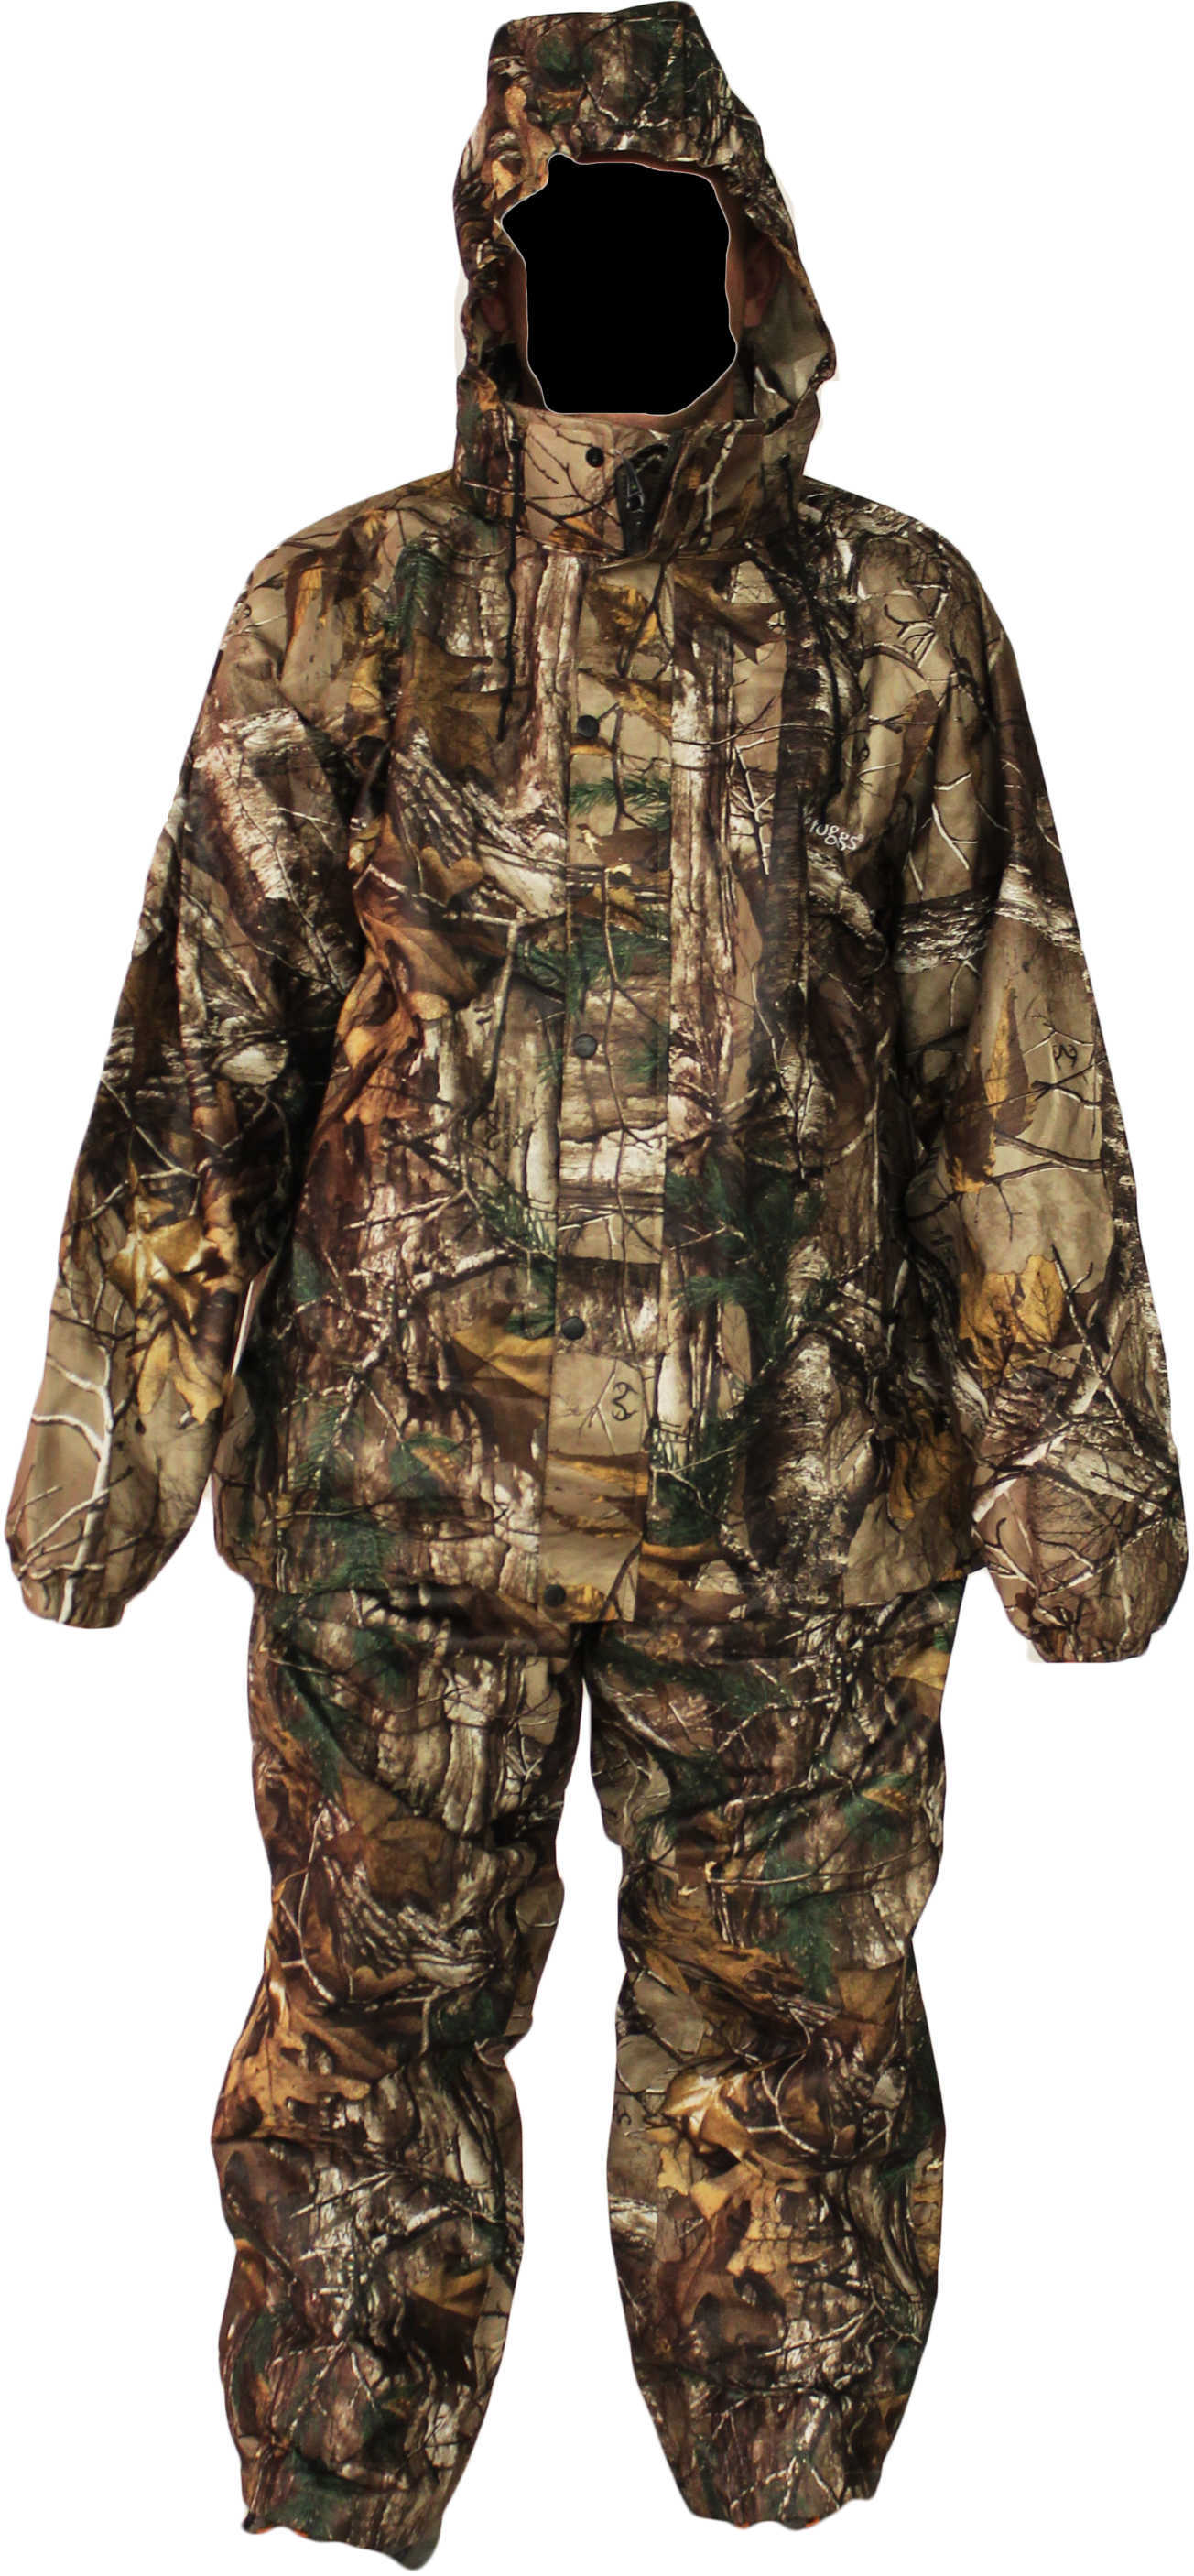 Frogg Toggs AllSport Suit Realtree Camo Large AS1310-54LG